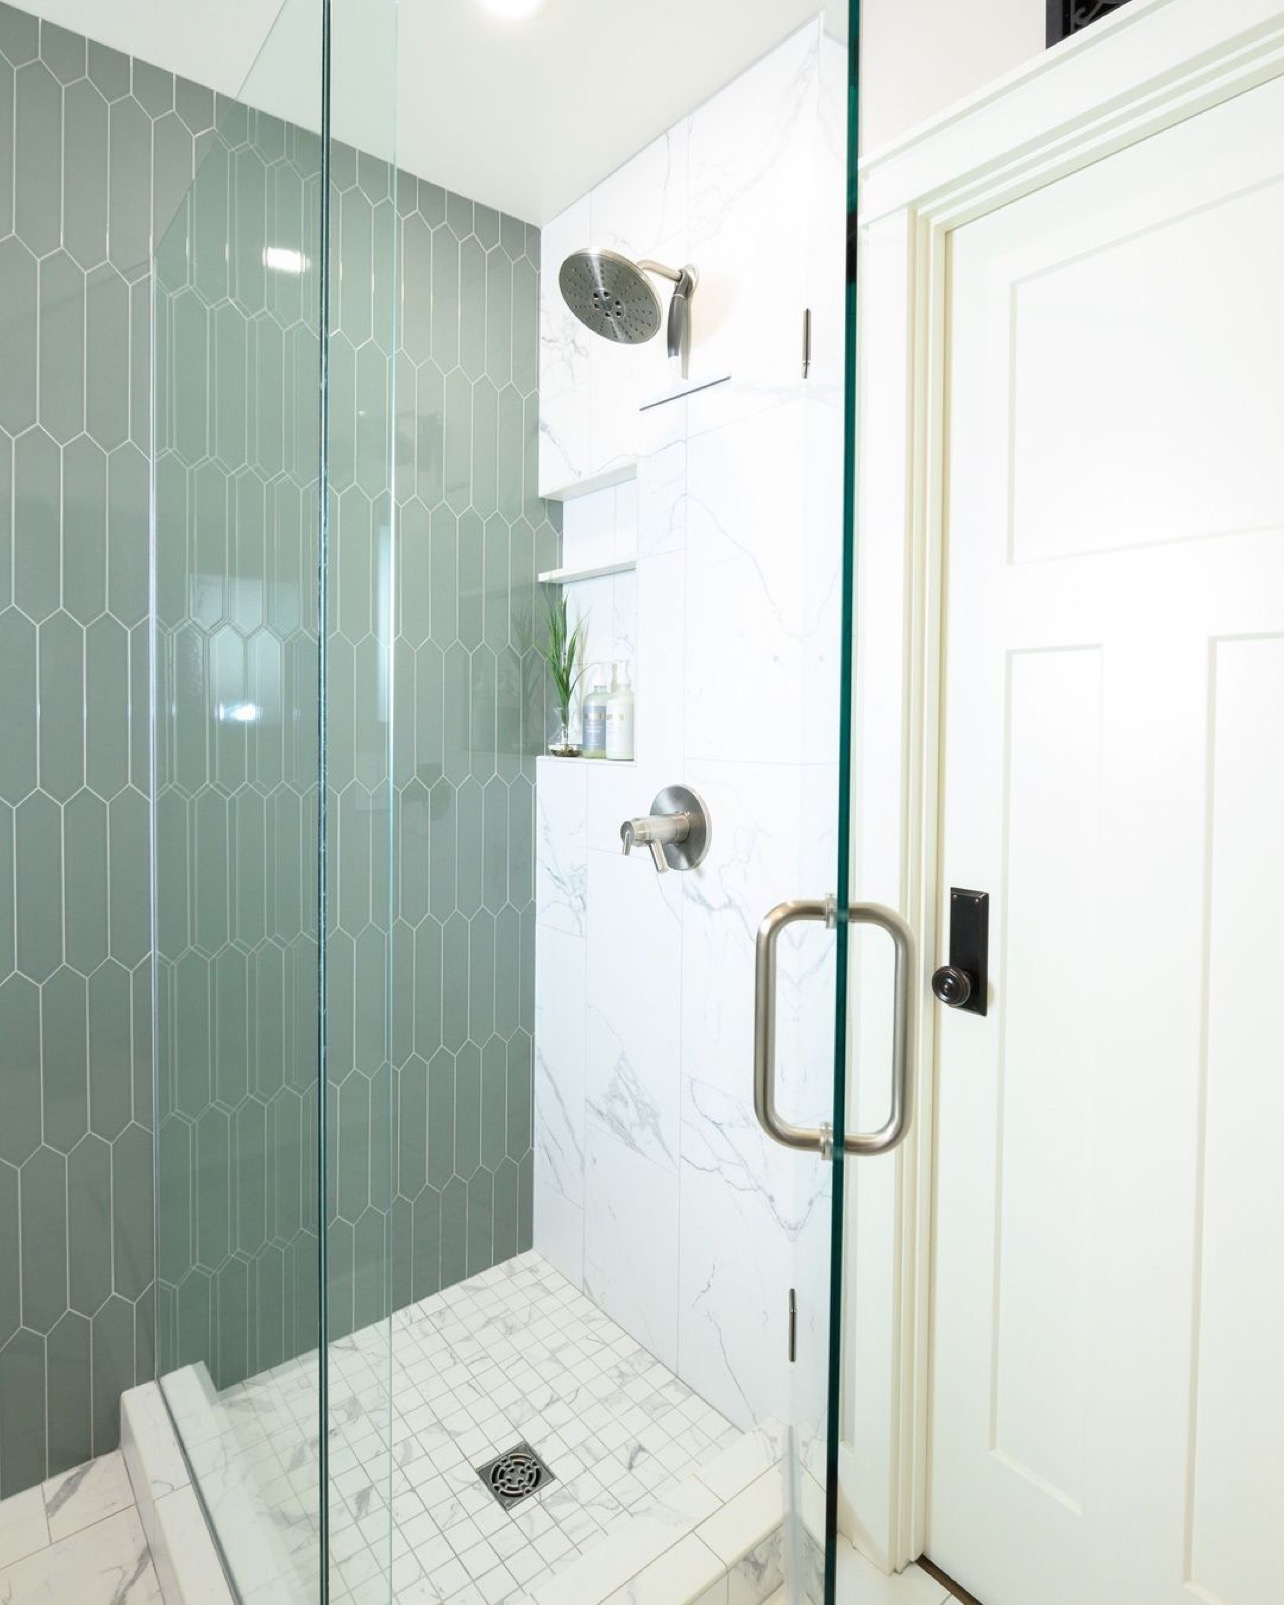 Accent wall with a contrasting tile in the shower looks both modern and adds a pop of color.